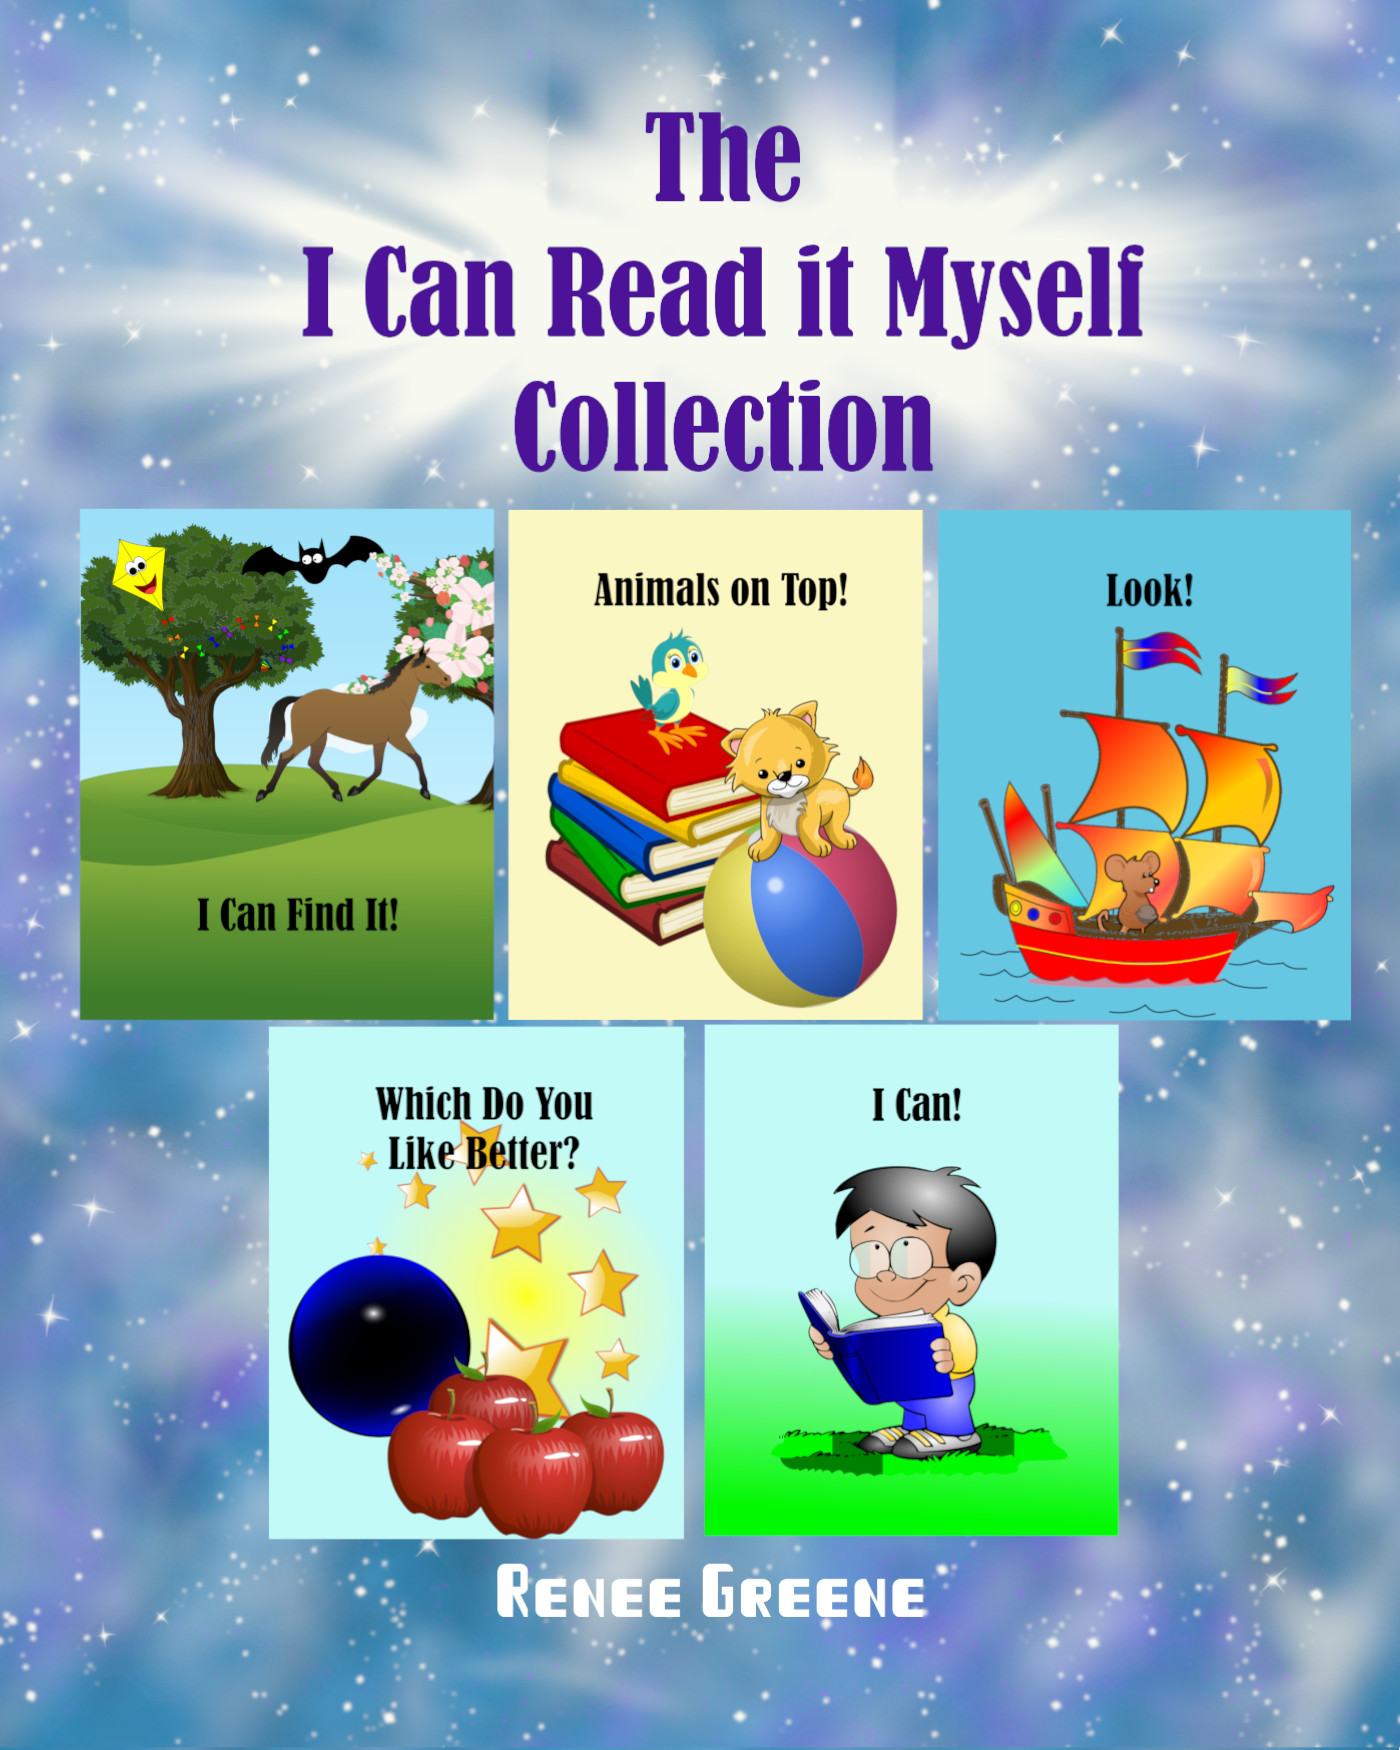 The I can Read it Myself Collection